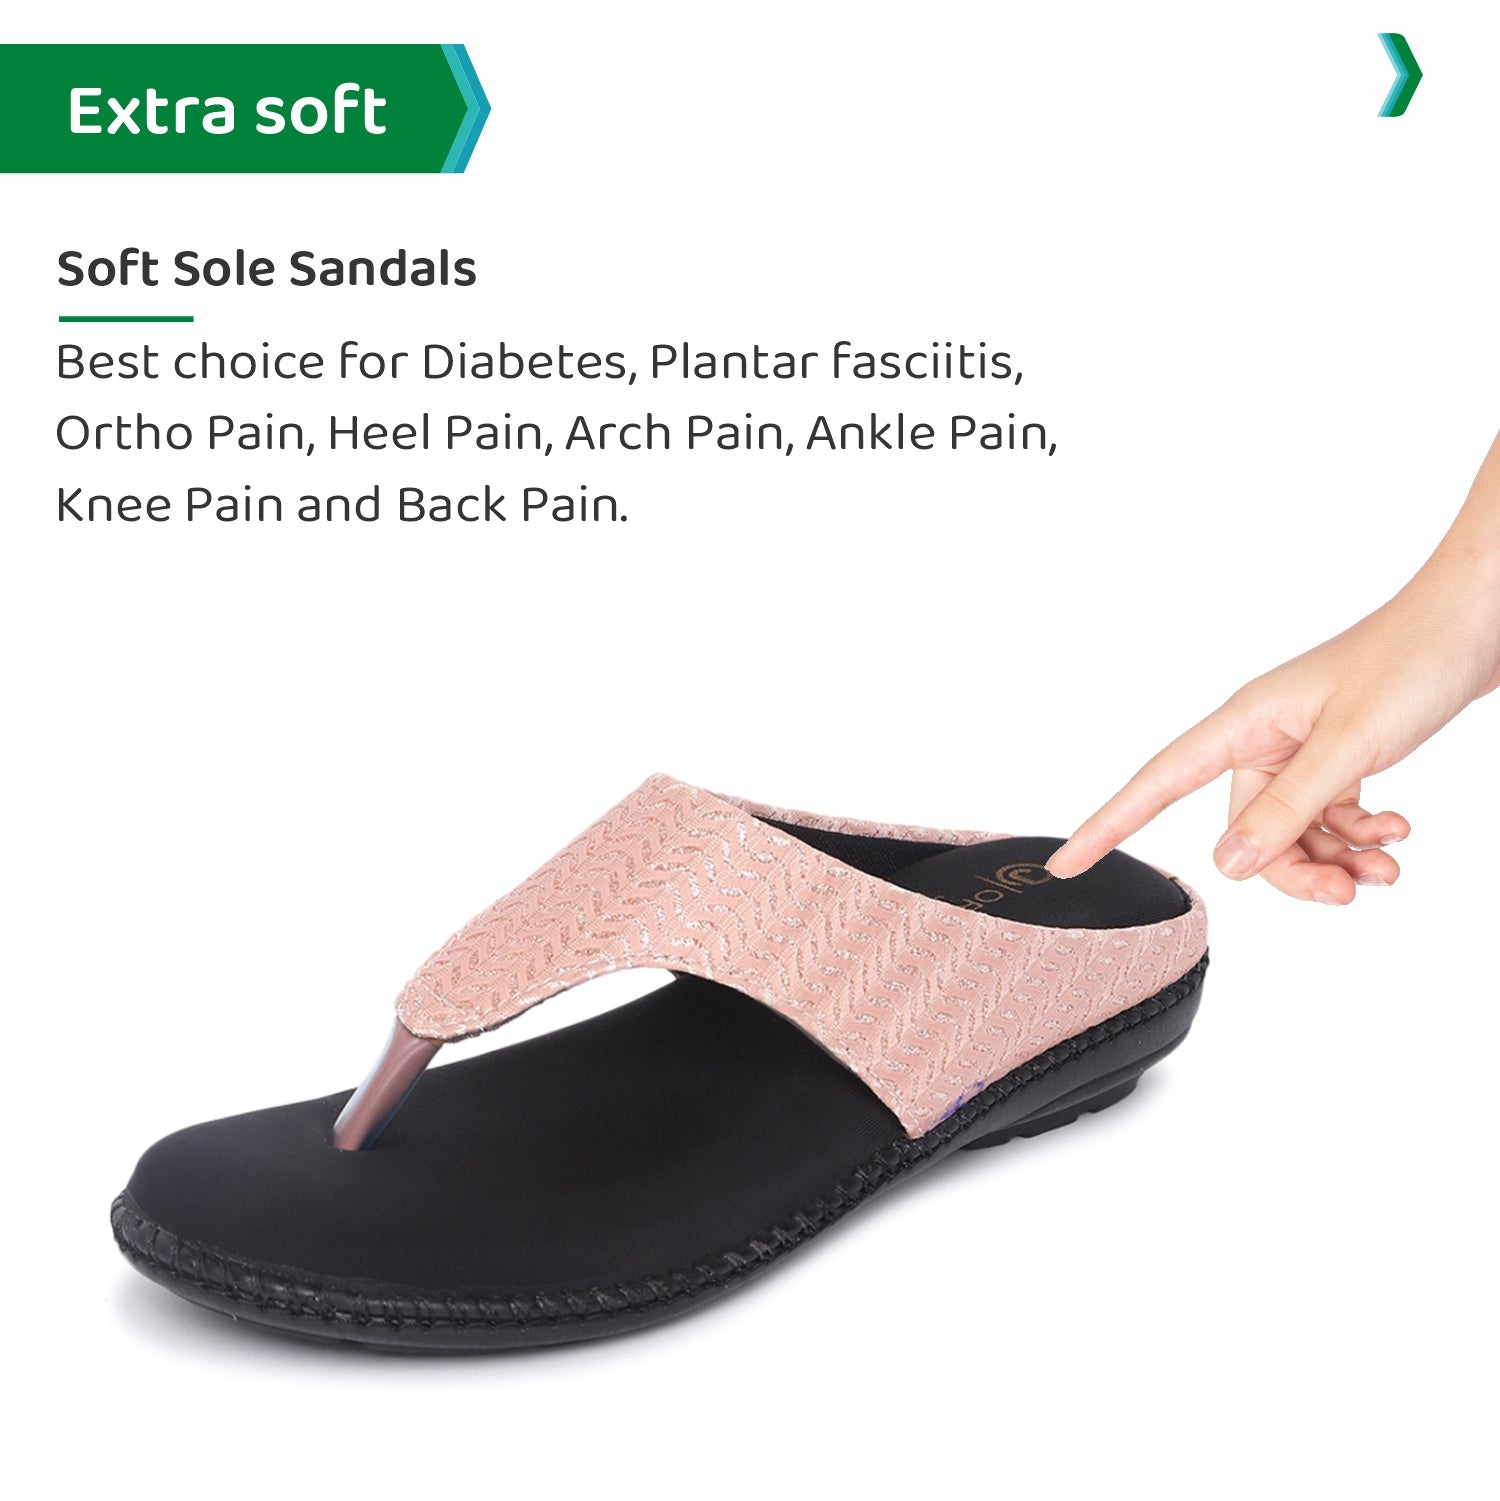 12 Best Shoes for Plantar Fasciitis